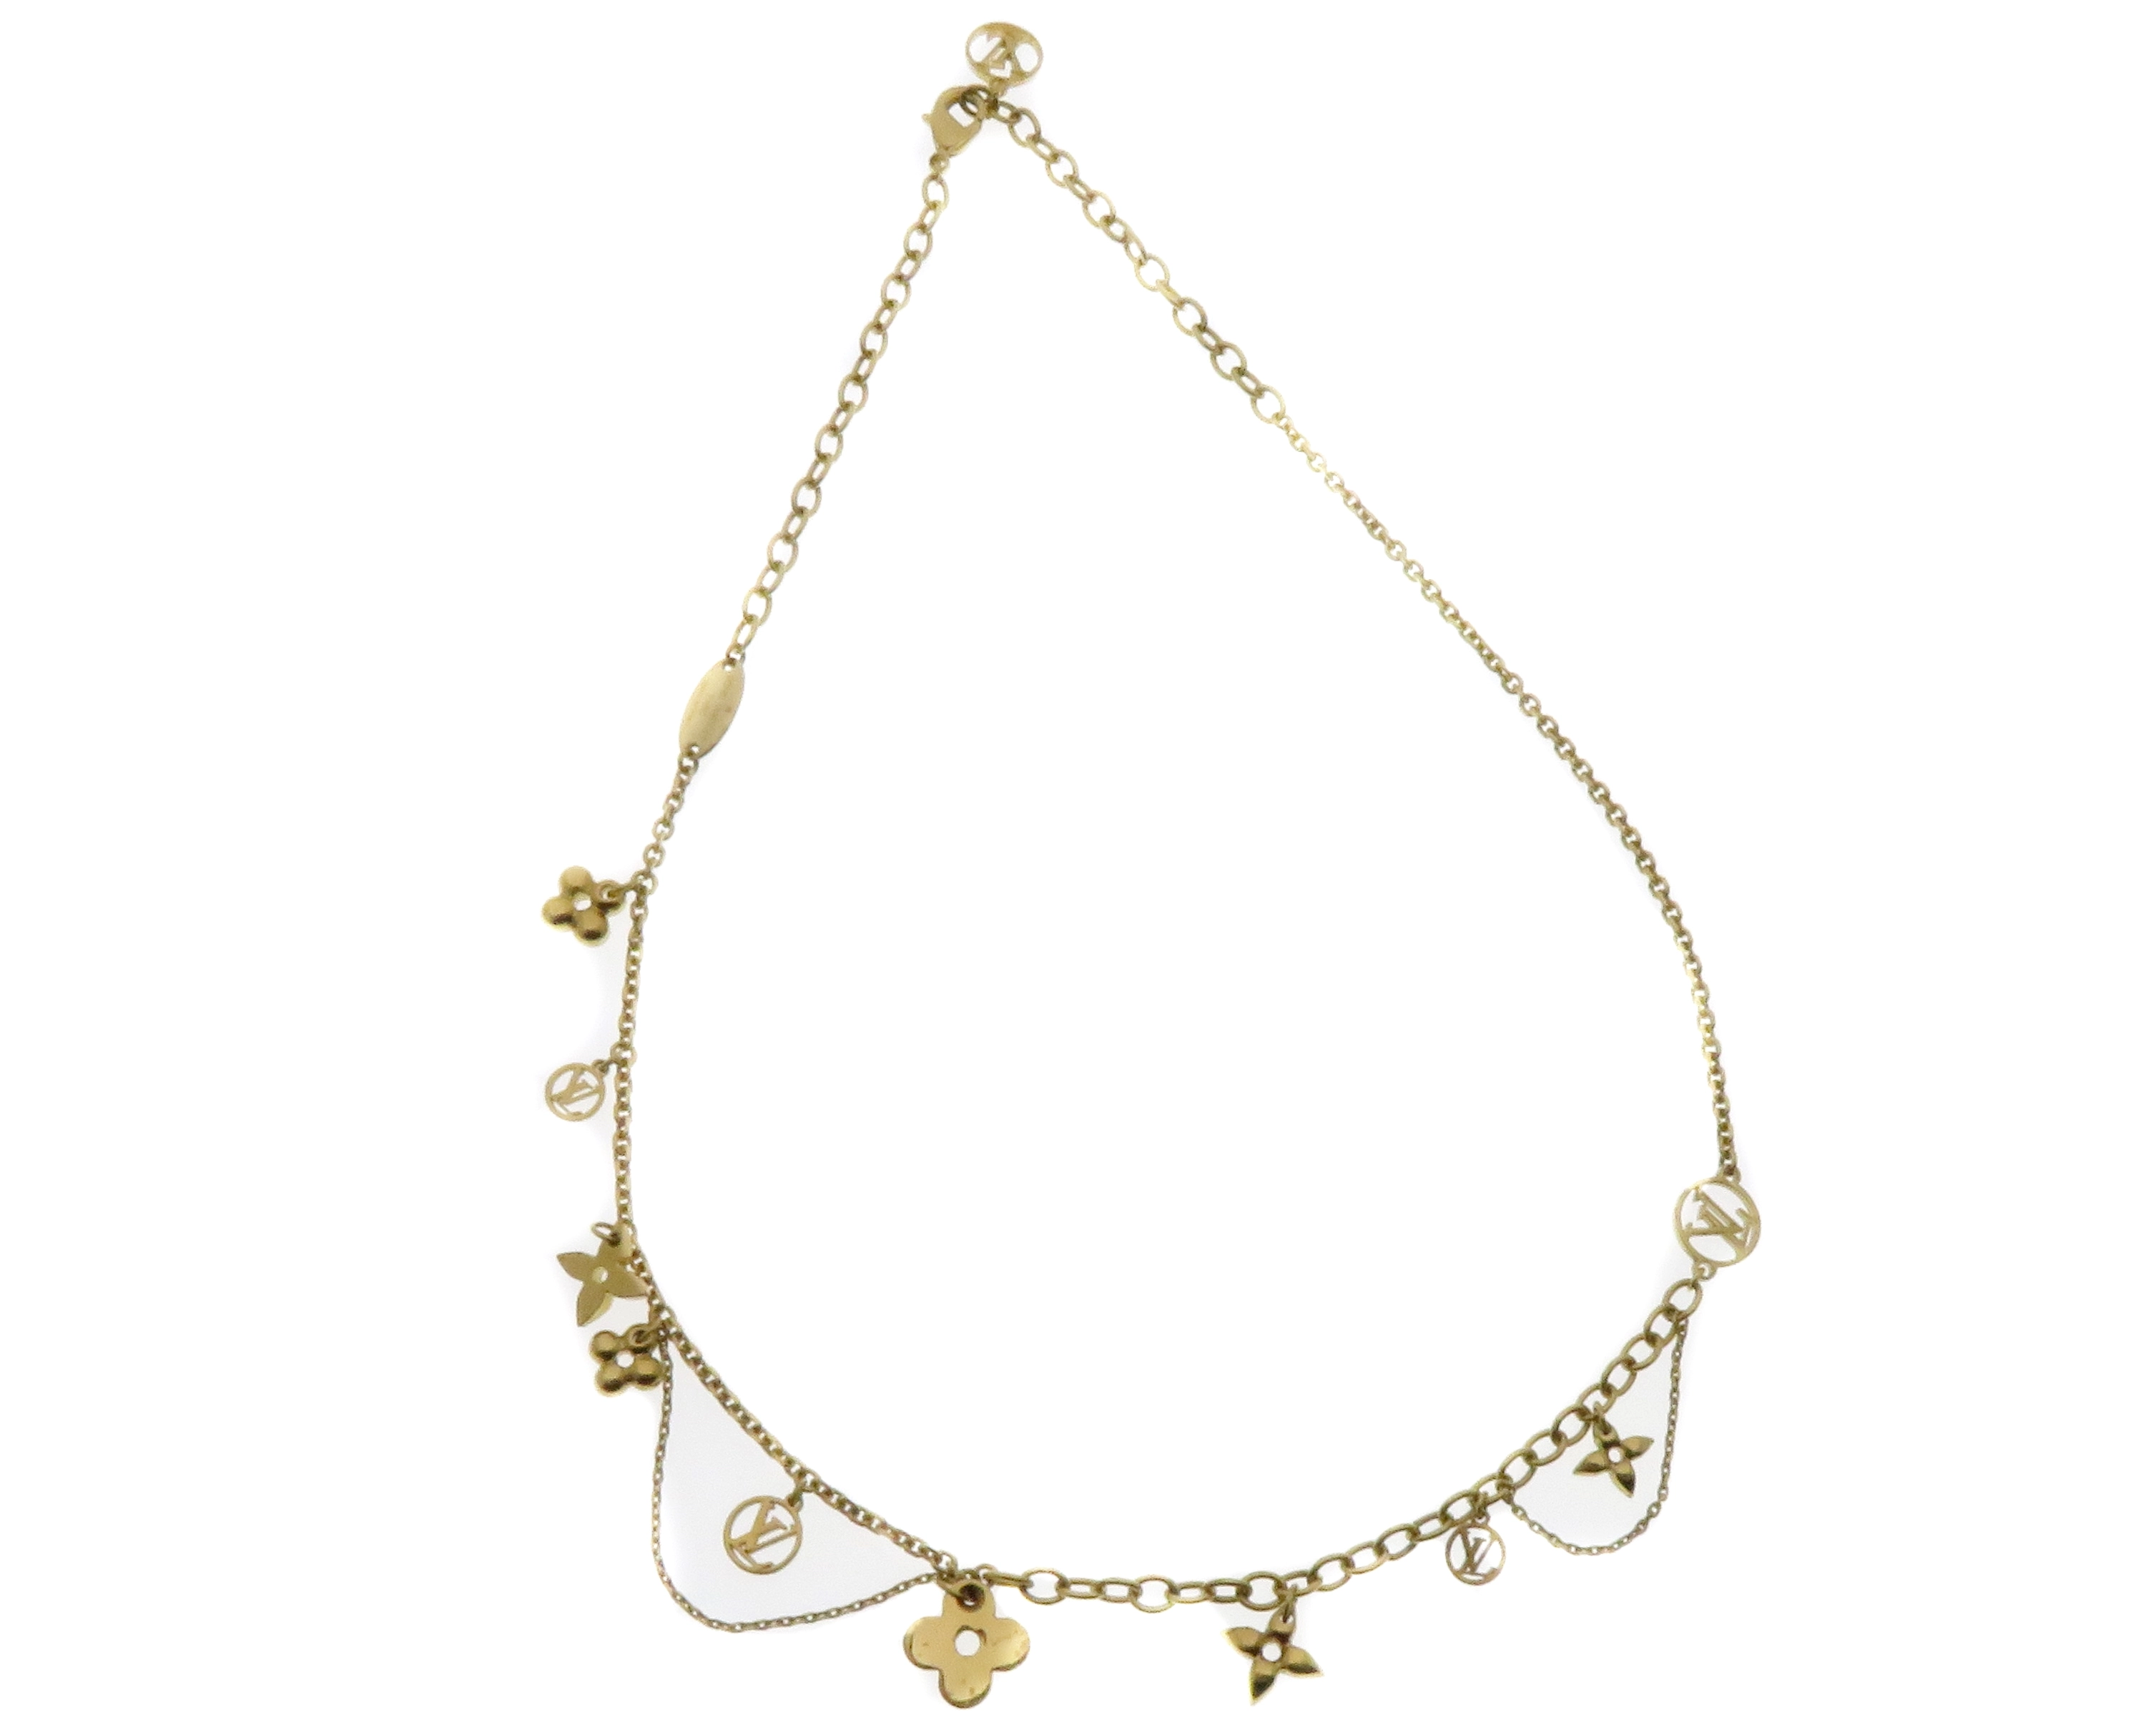 Louis Vuitton Blooming supple necklace (M64855)